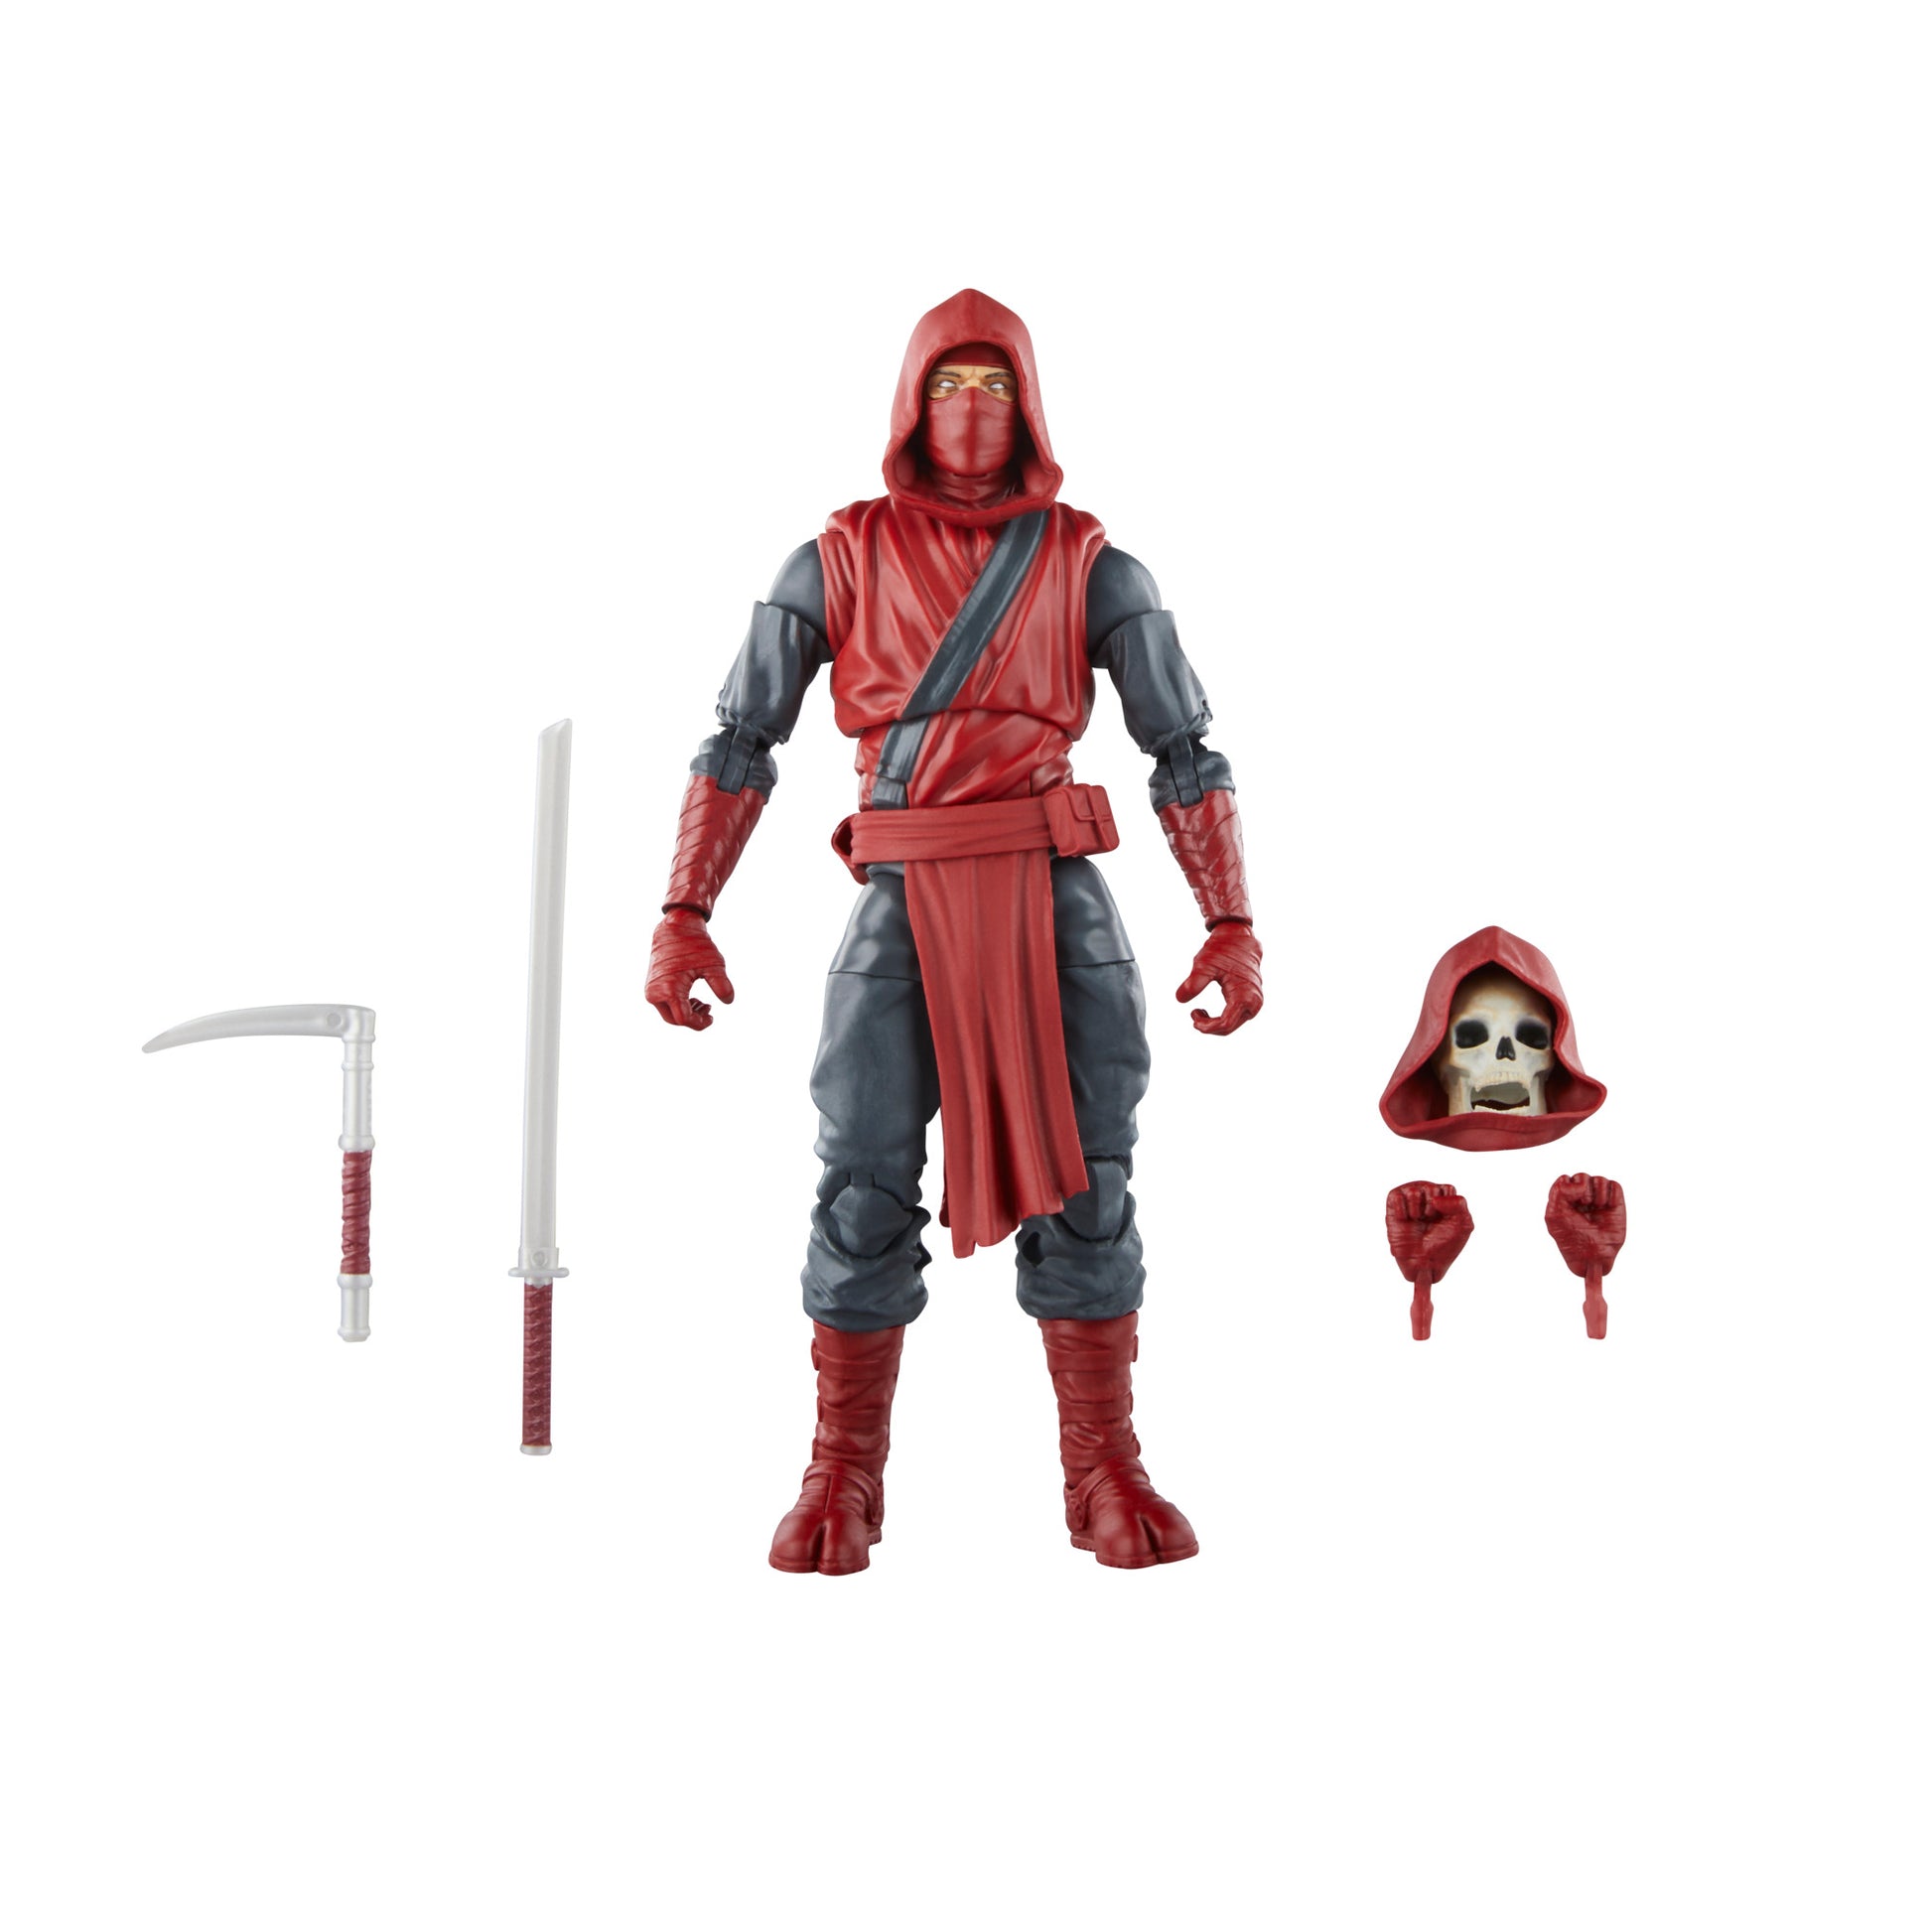 Hasbro Marvel Legends Series The Fist Ninja Action Figure Toy with all accessories - Heretoserveyou